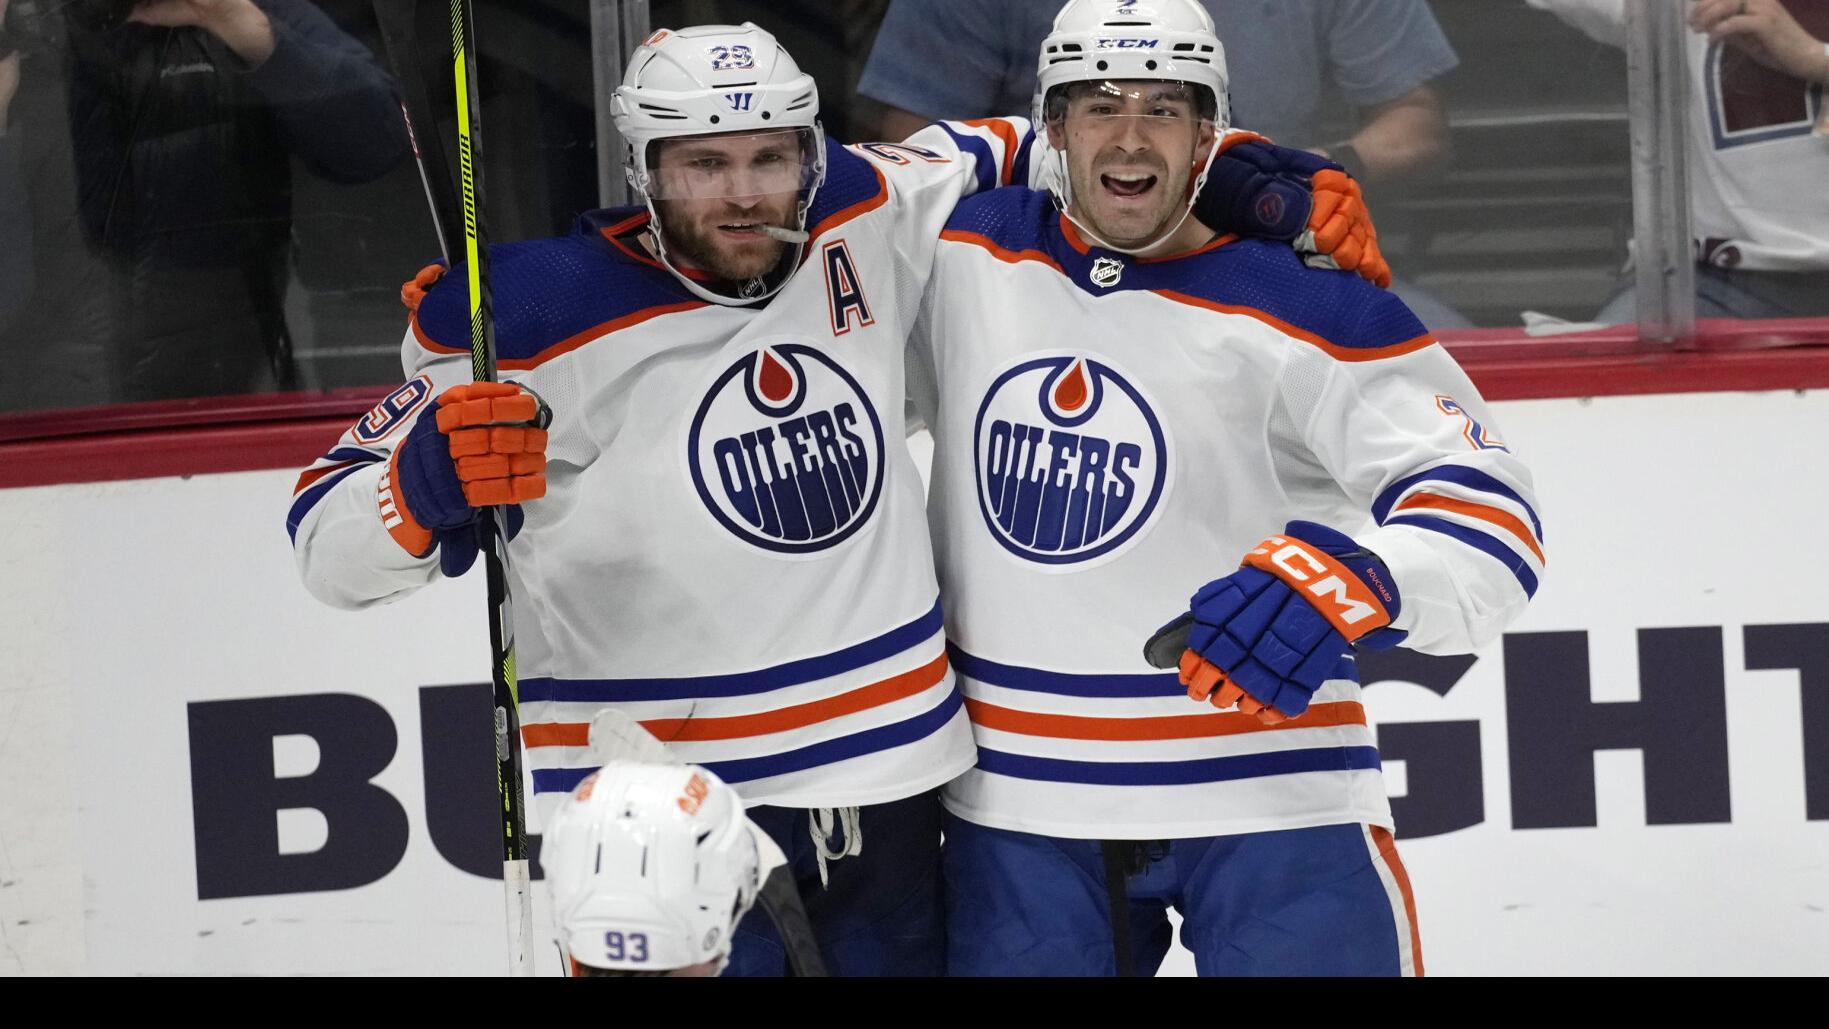 Kings vs. Oilers odds: Who is favored in first round series of